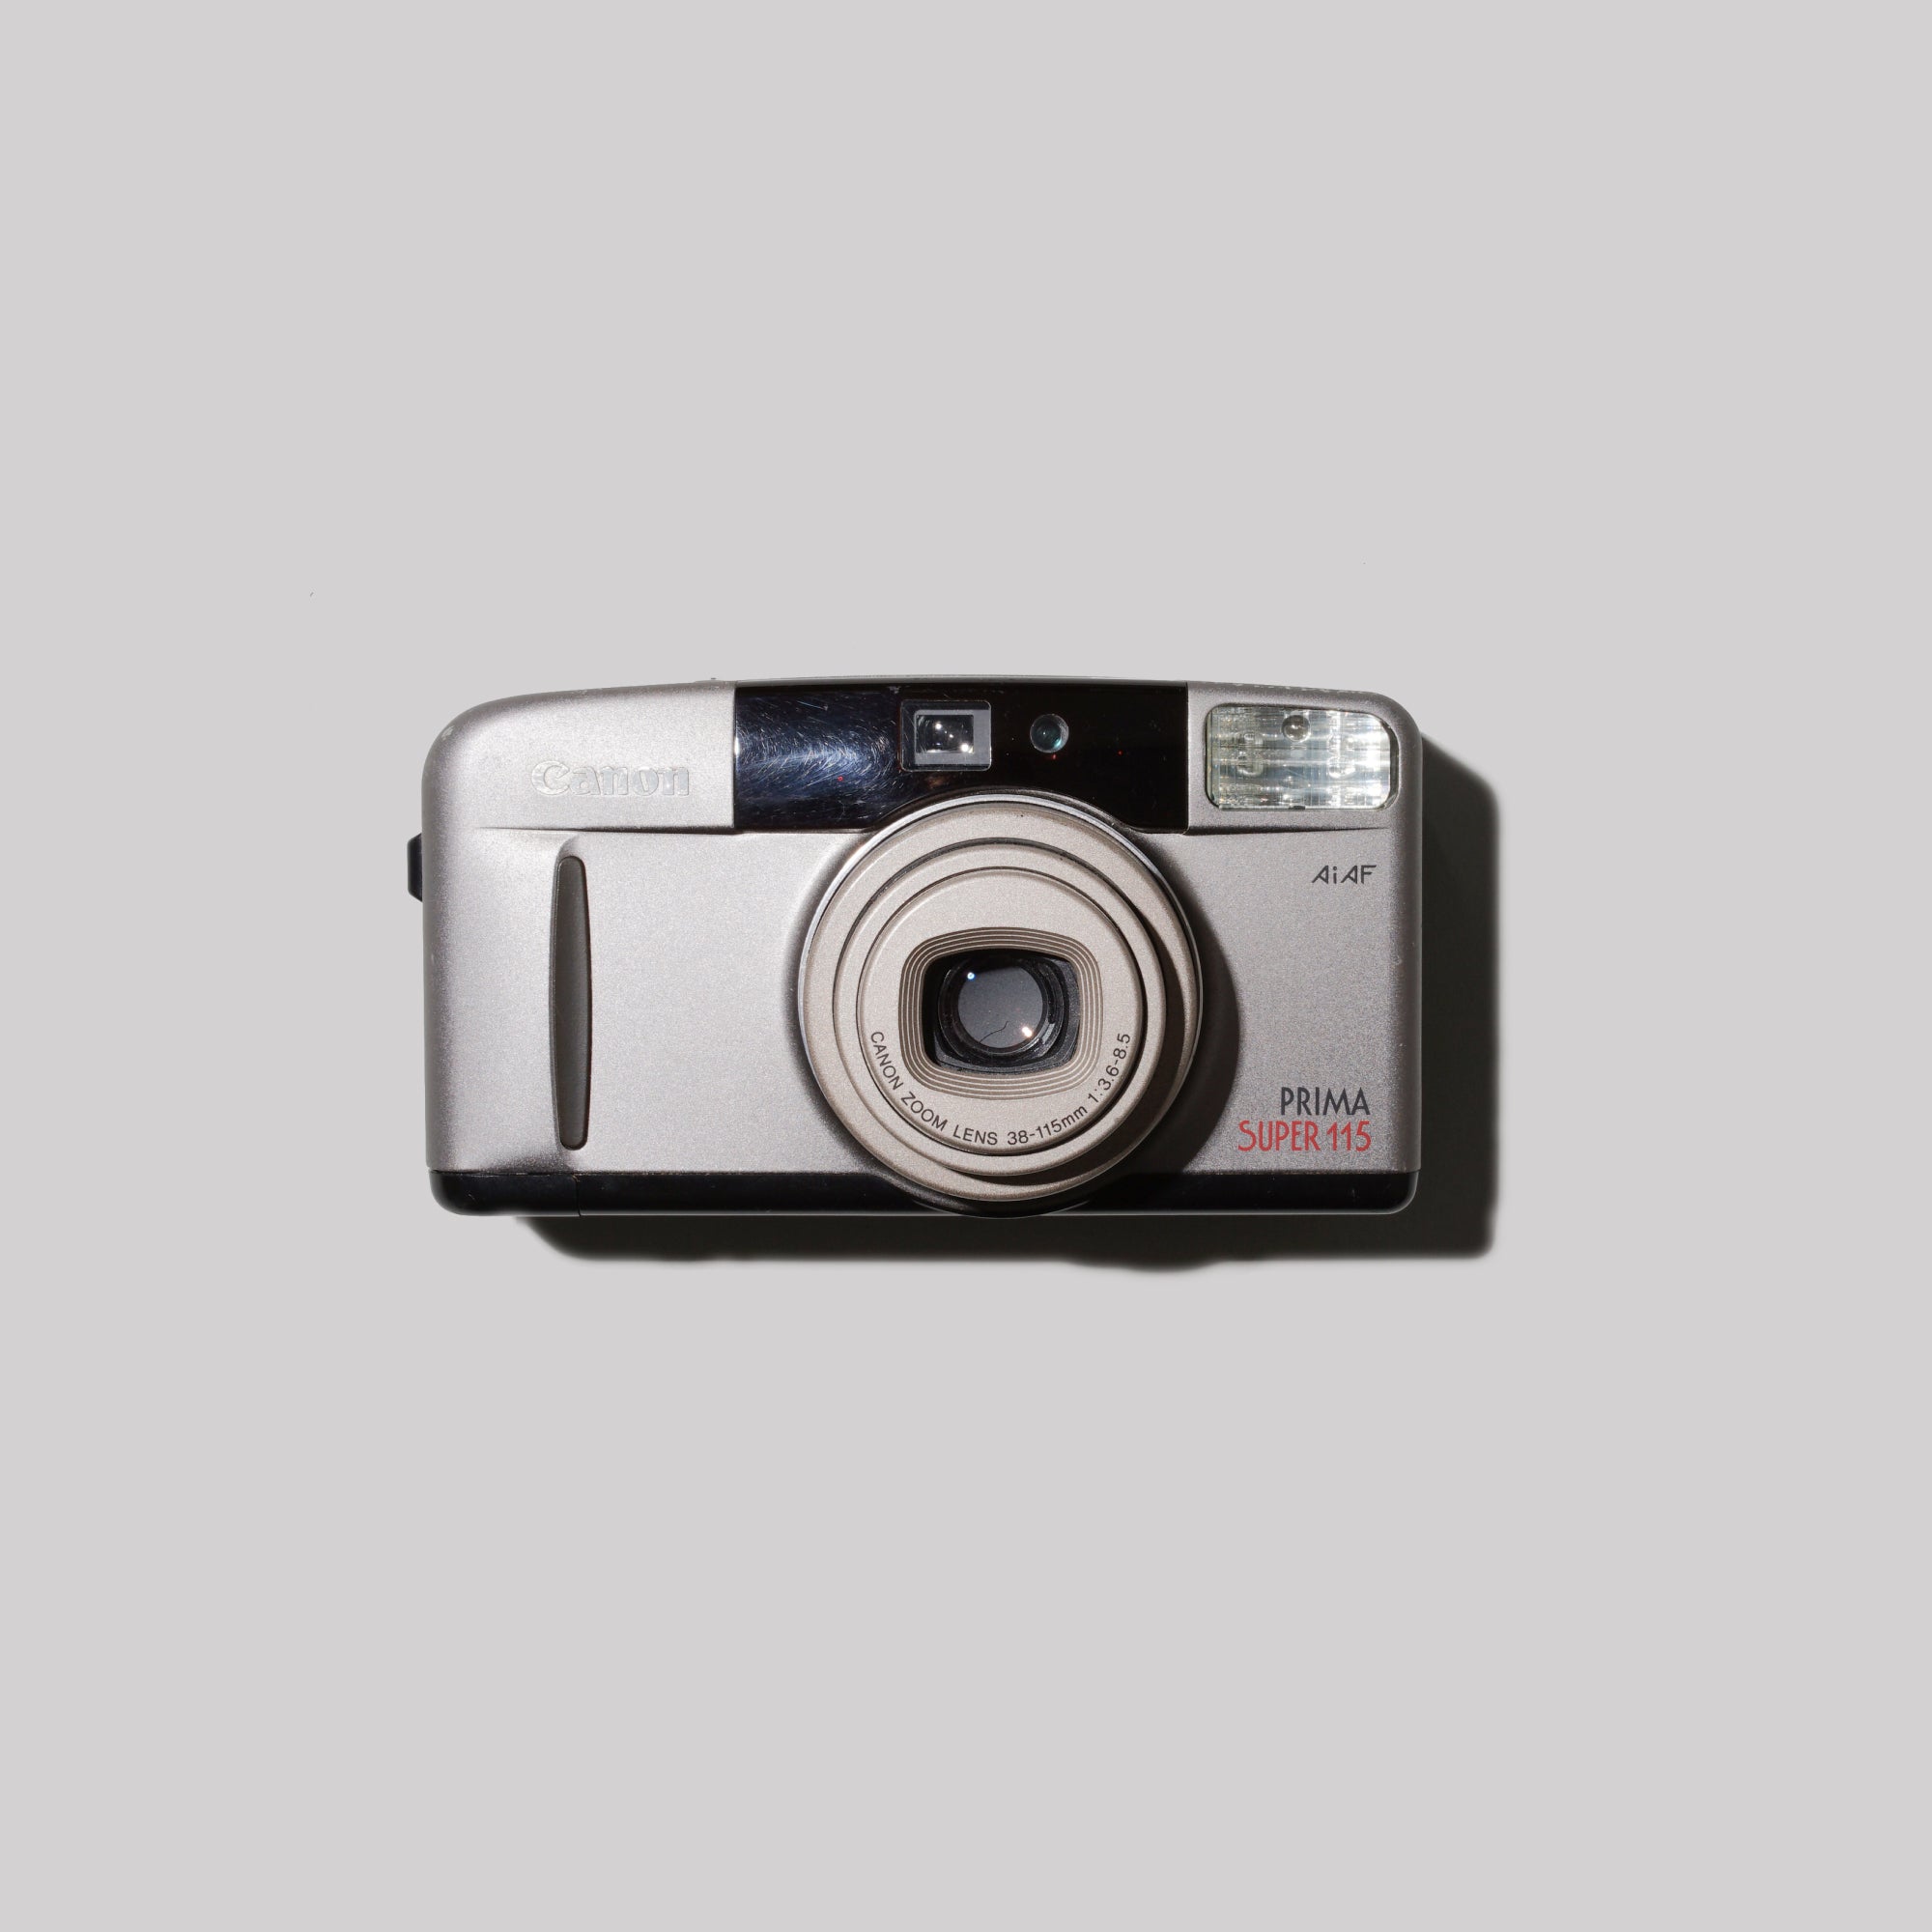 Buy Canon Prima 115 now at Analogue Amsterdam